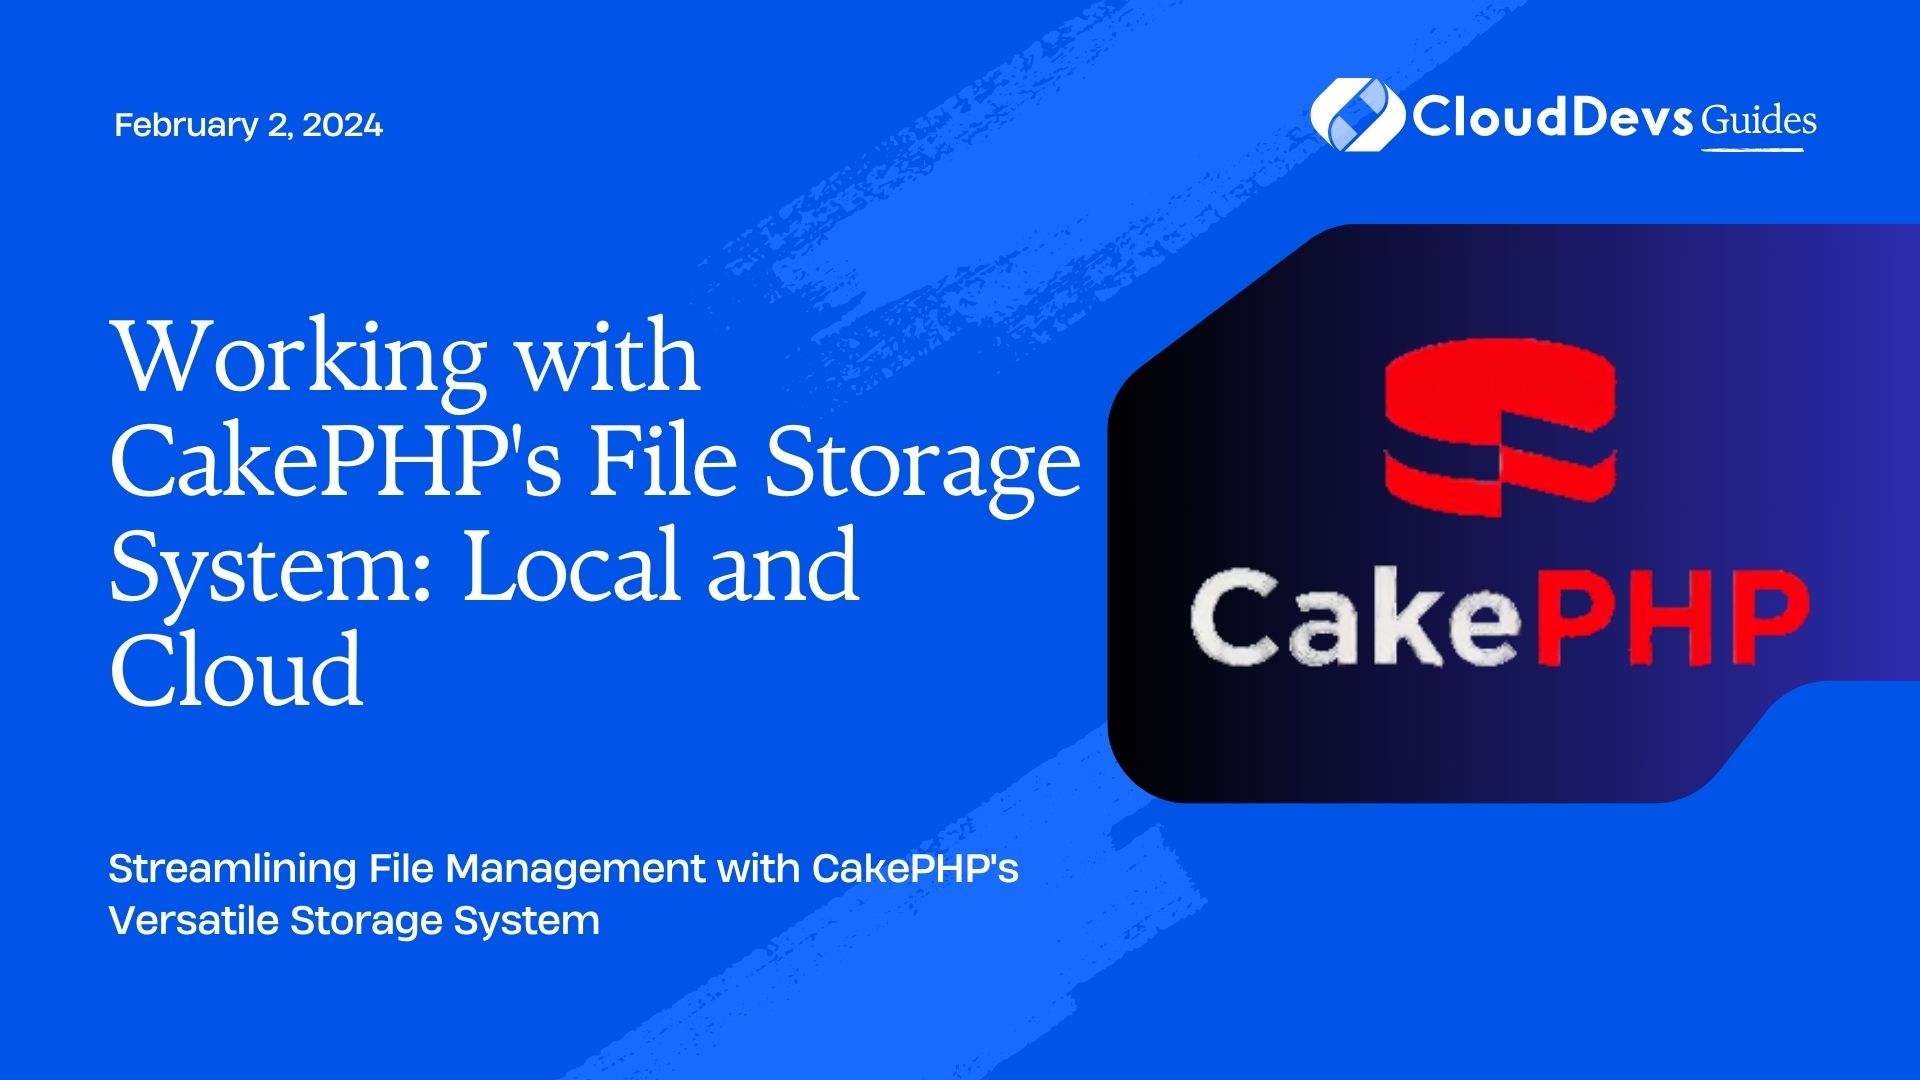 Working with CakePHP's File Storage System: Local and Cloud